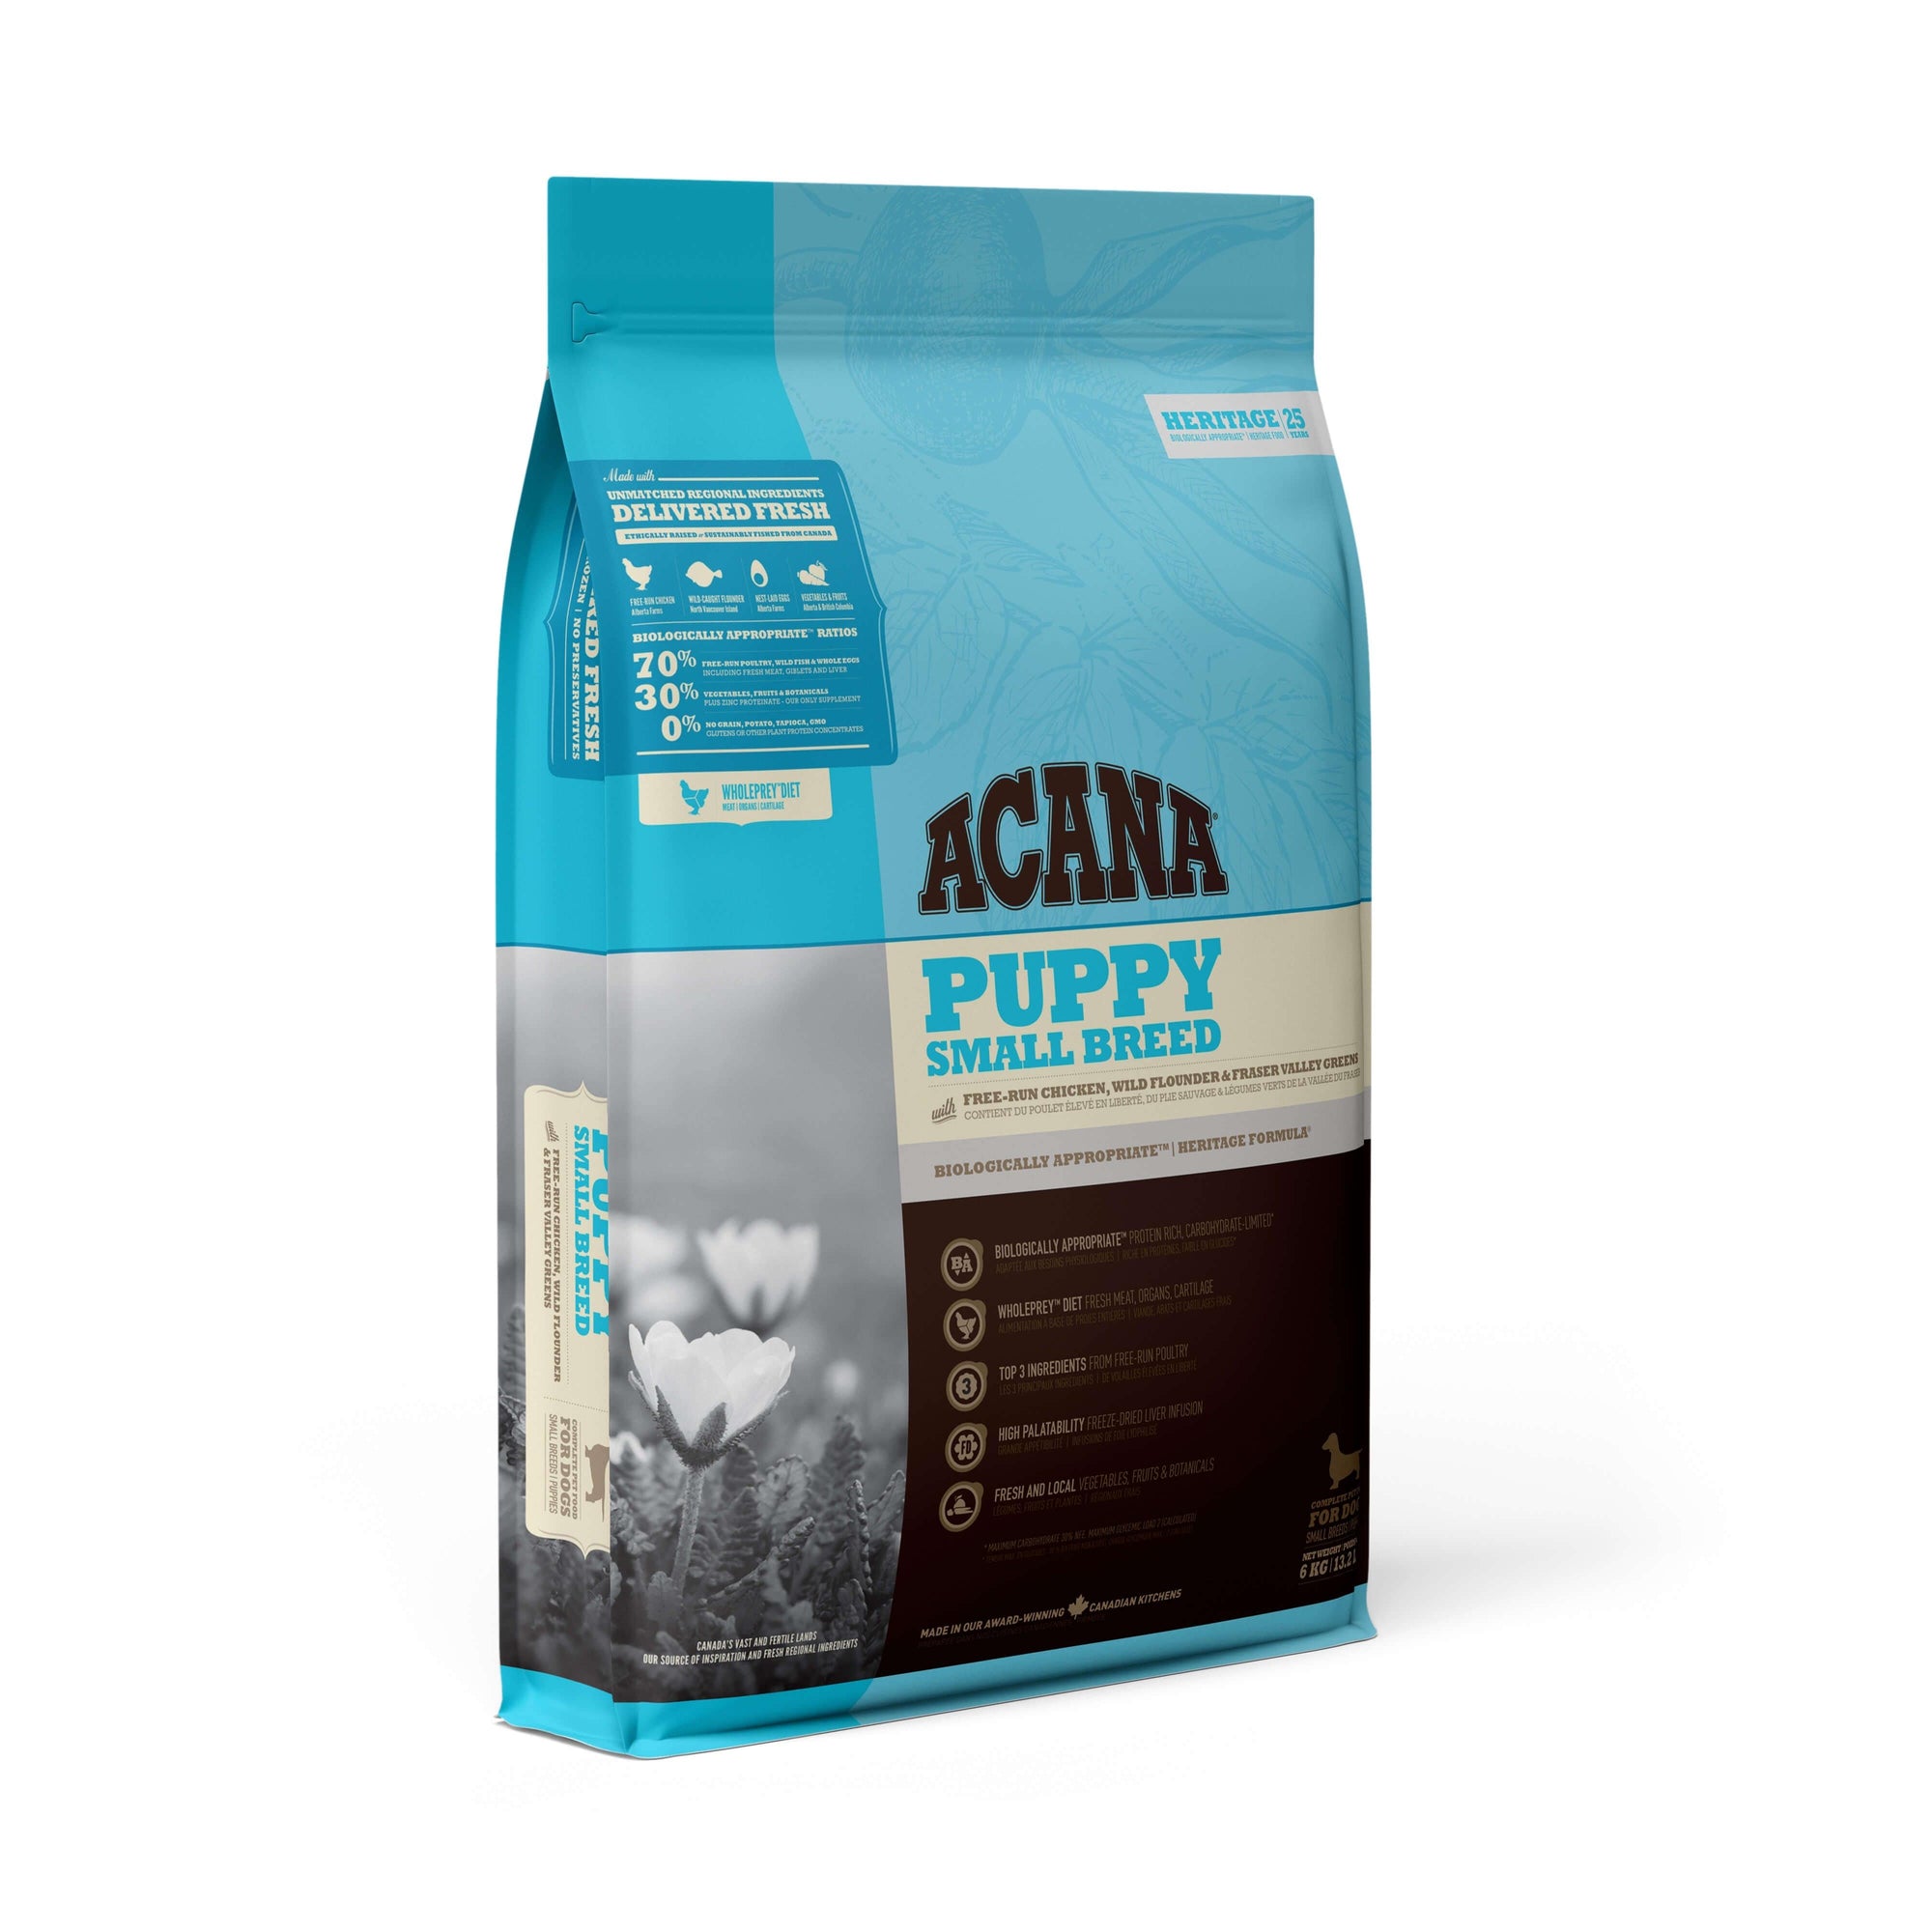 Acana Biscuits Acana Puppy Small Breed